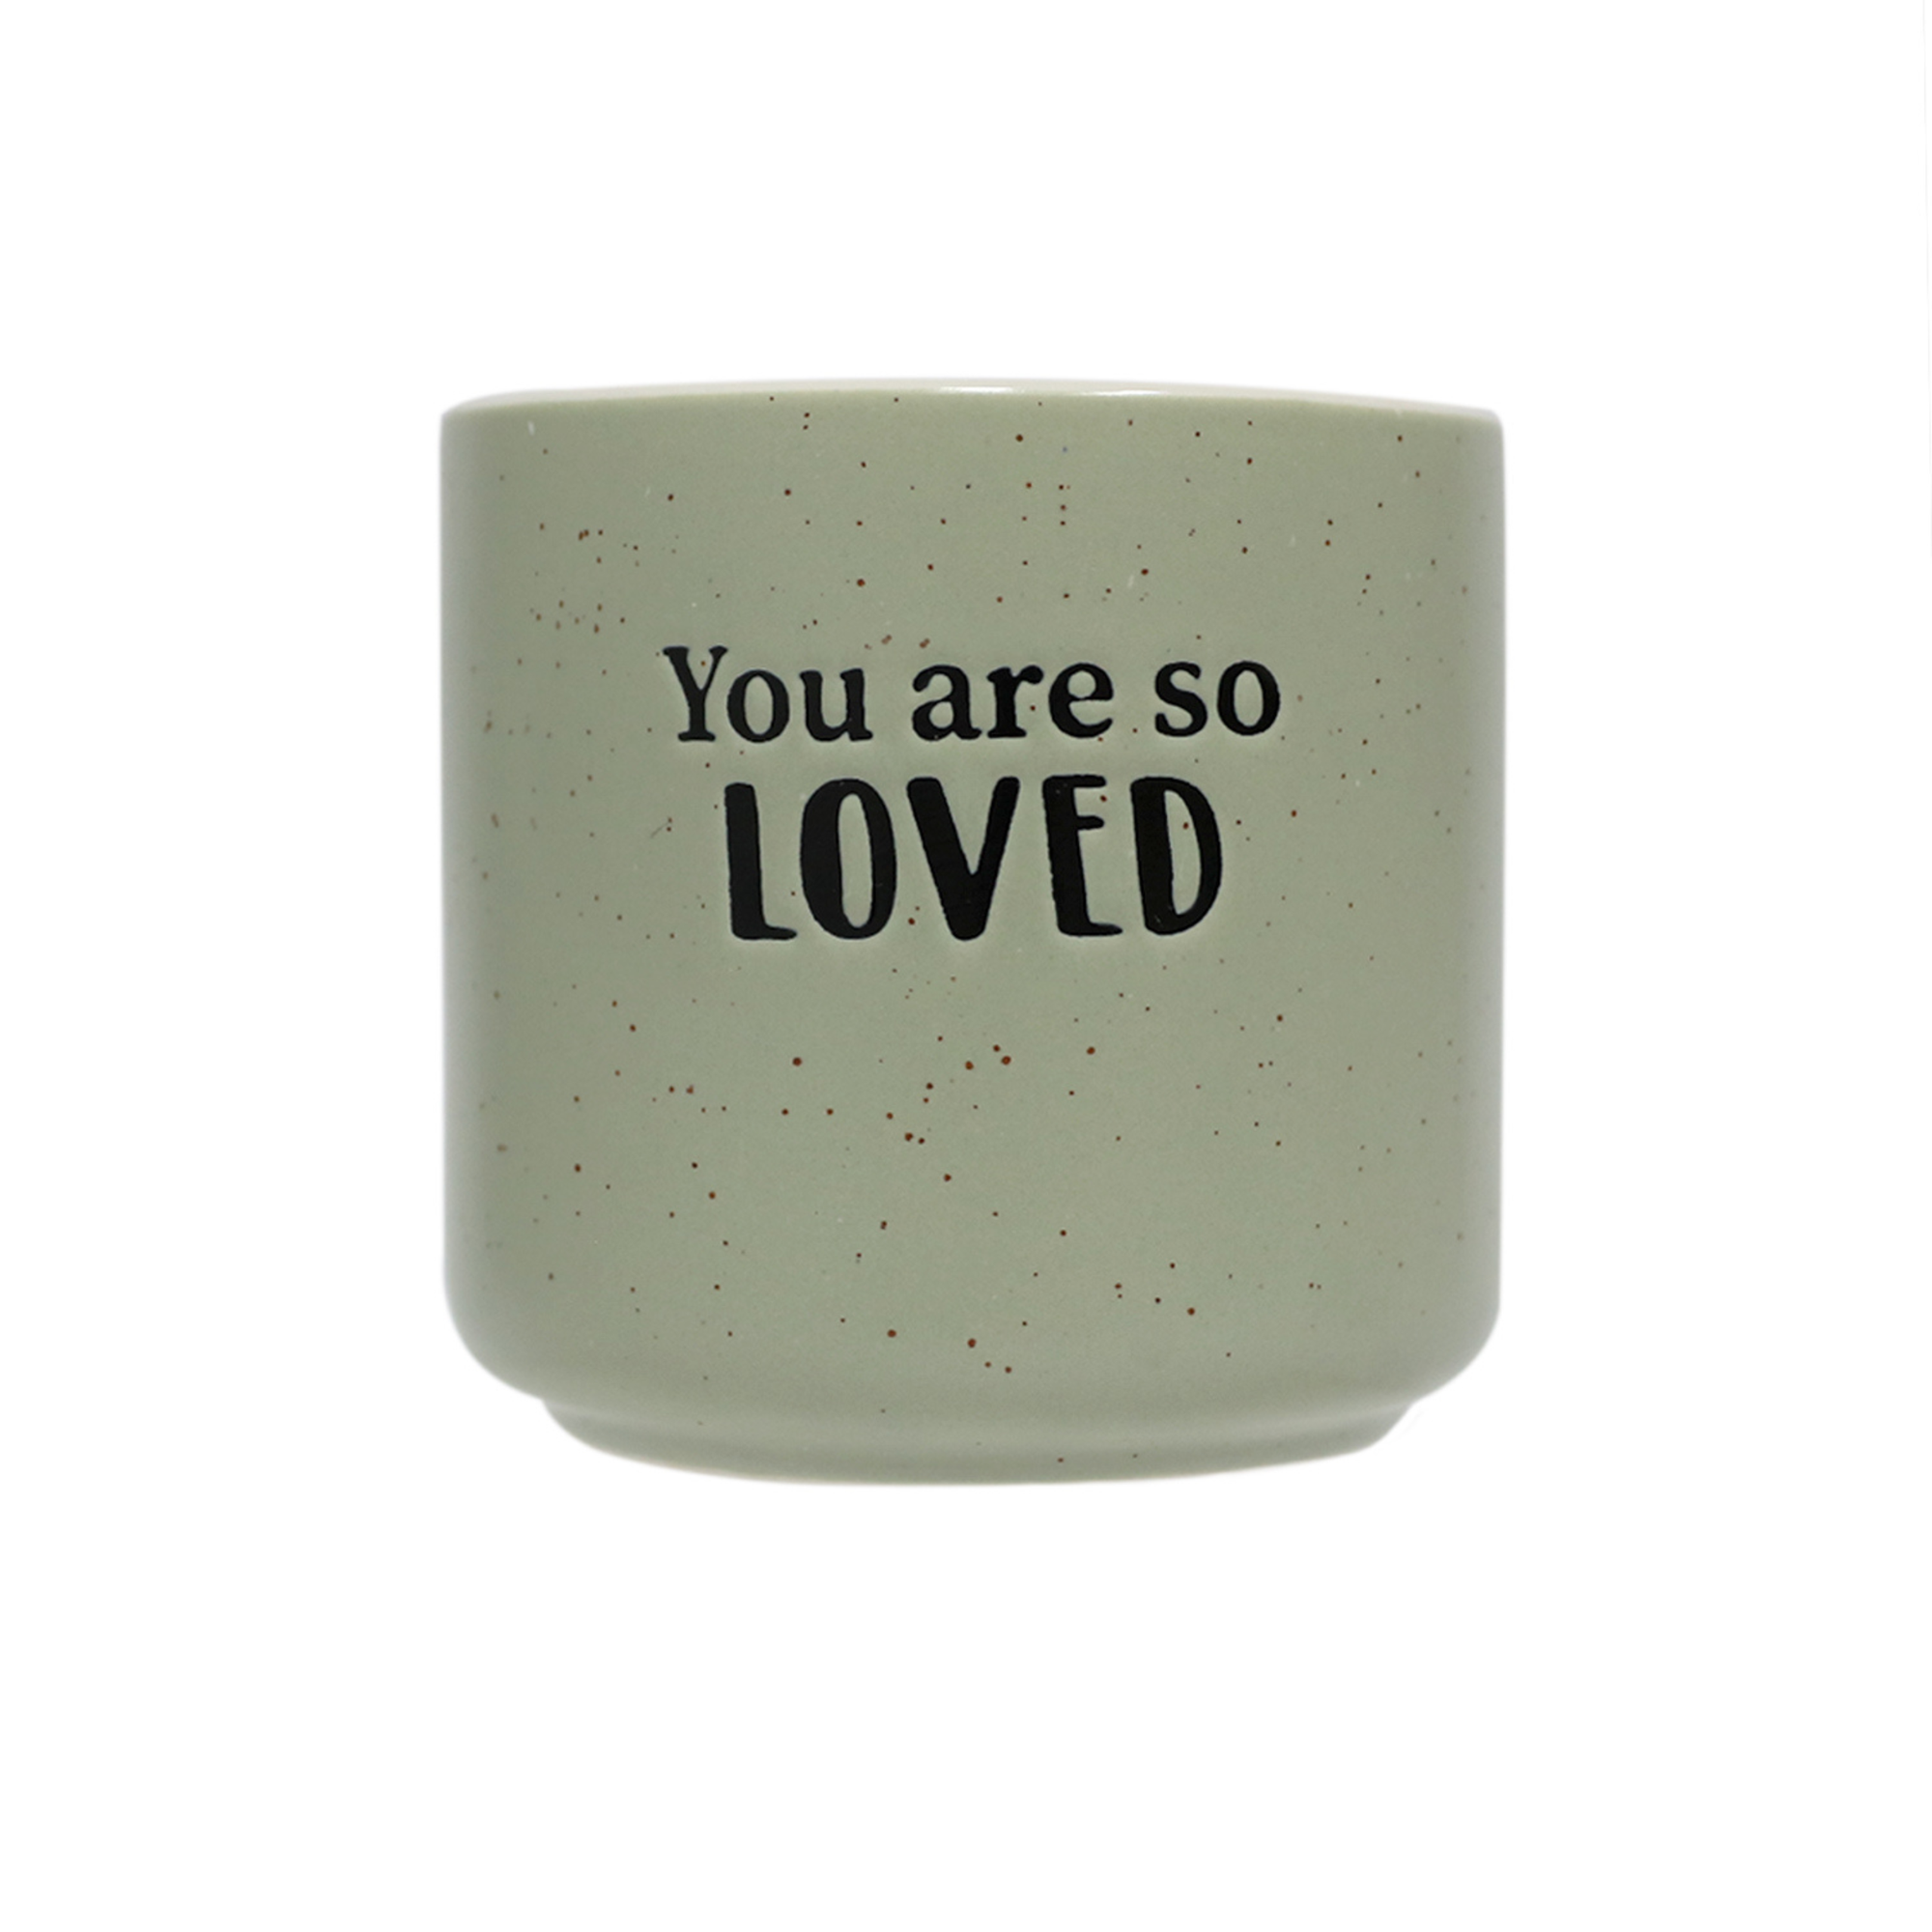 Affirmation Quote Plant Pot You are so loved